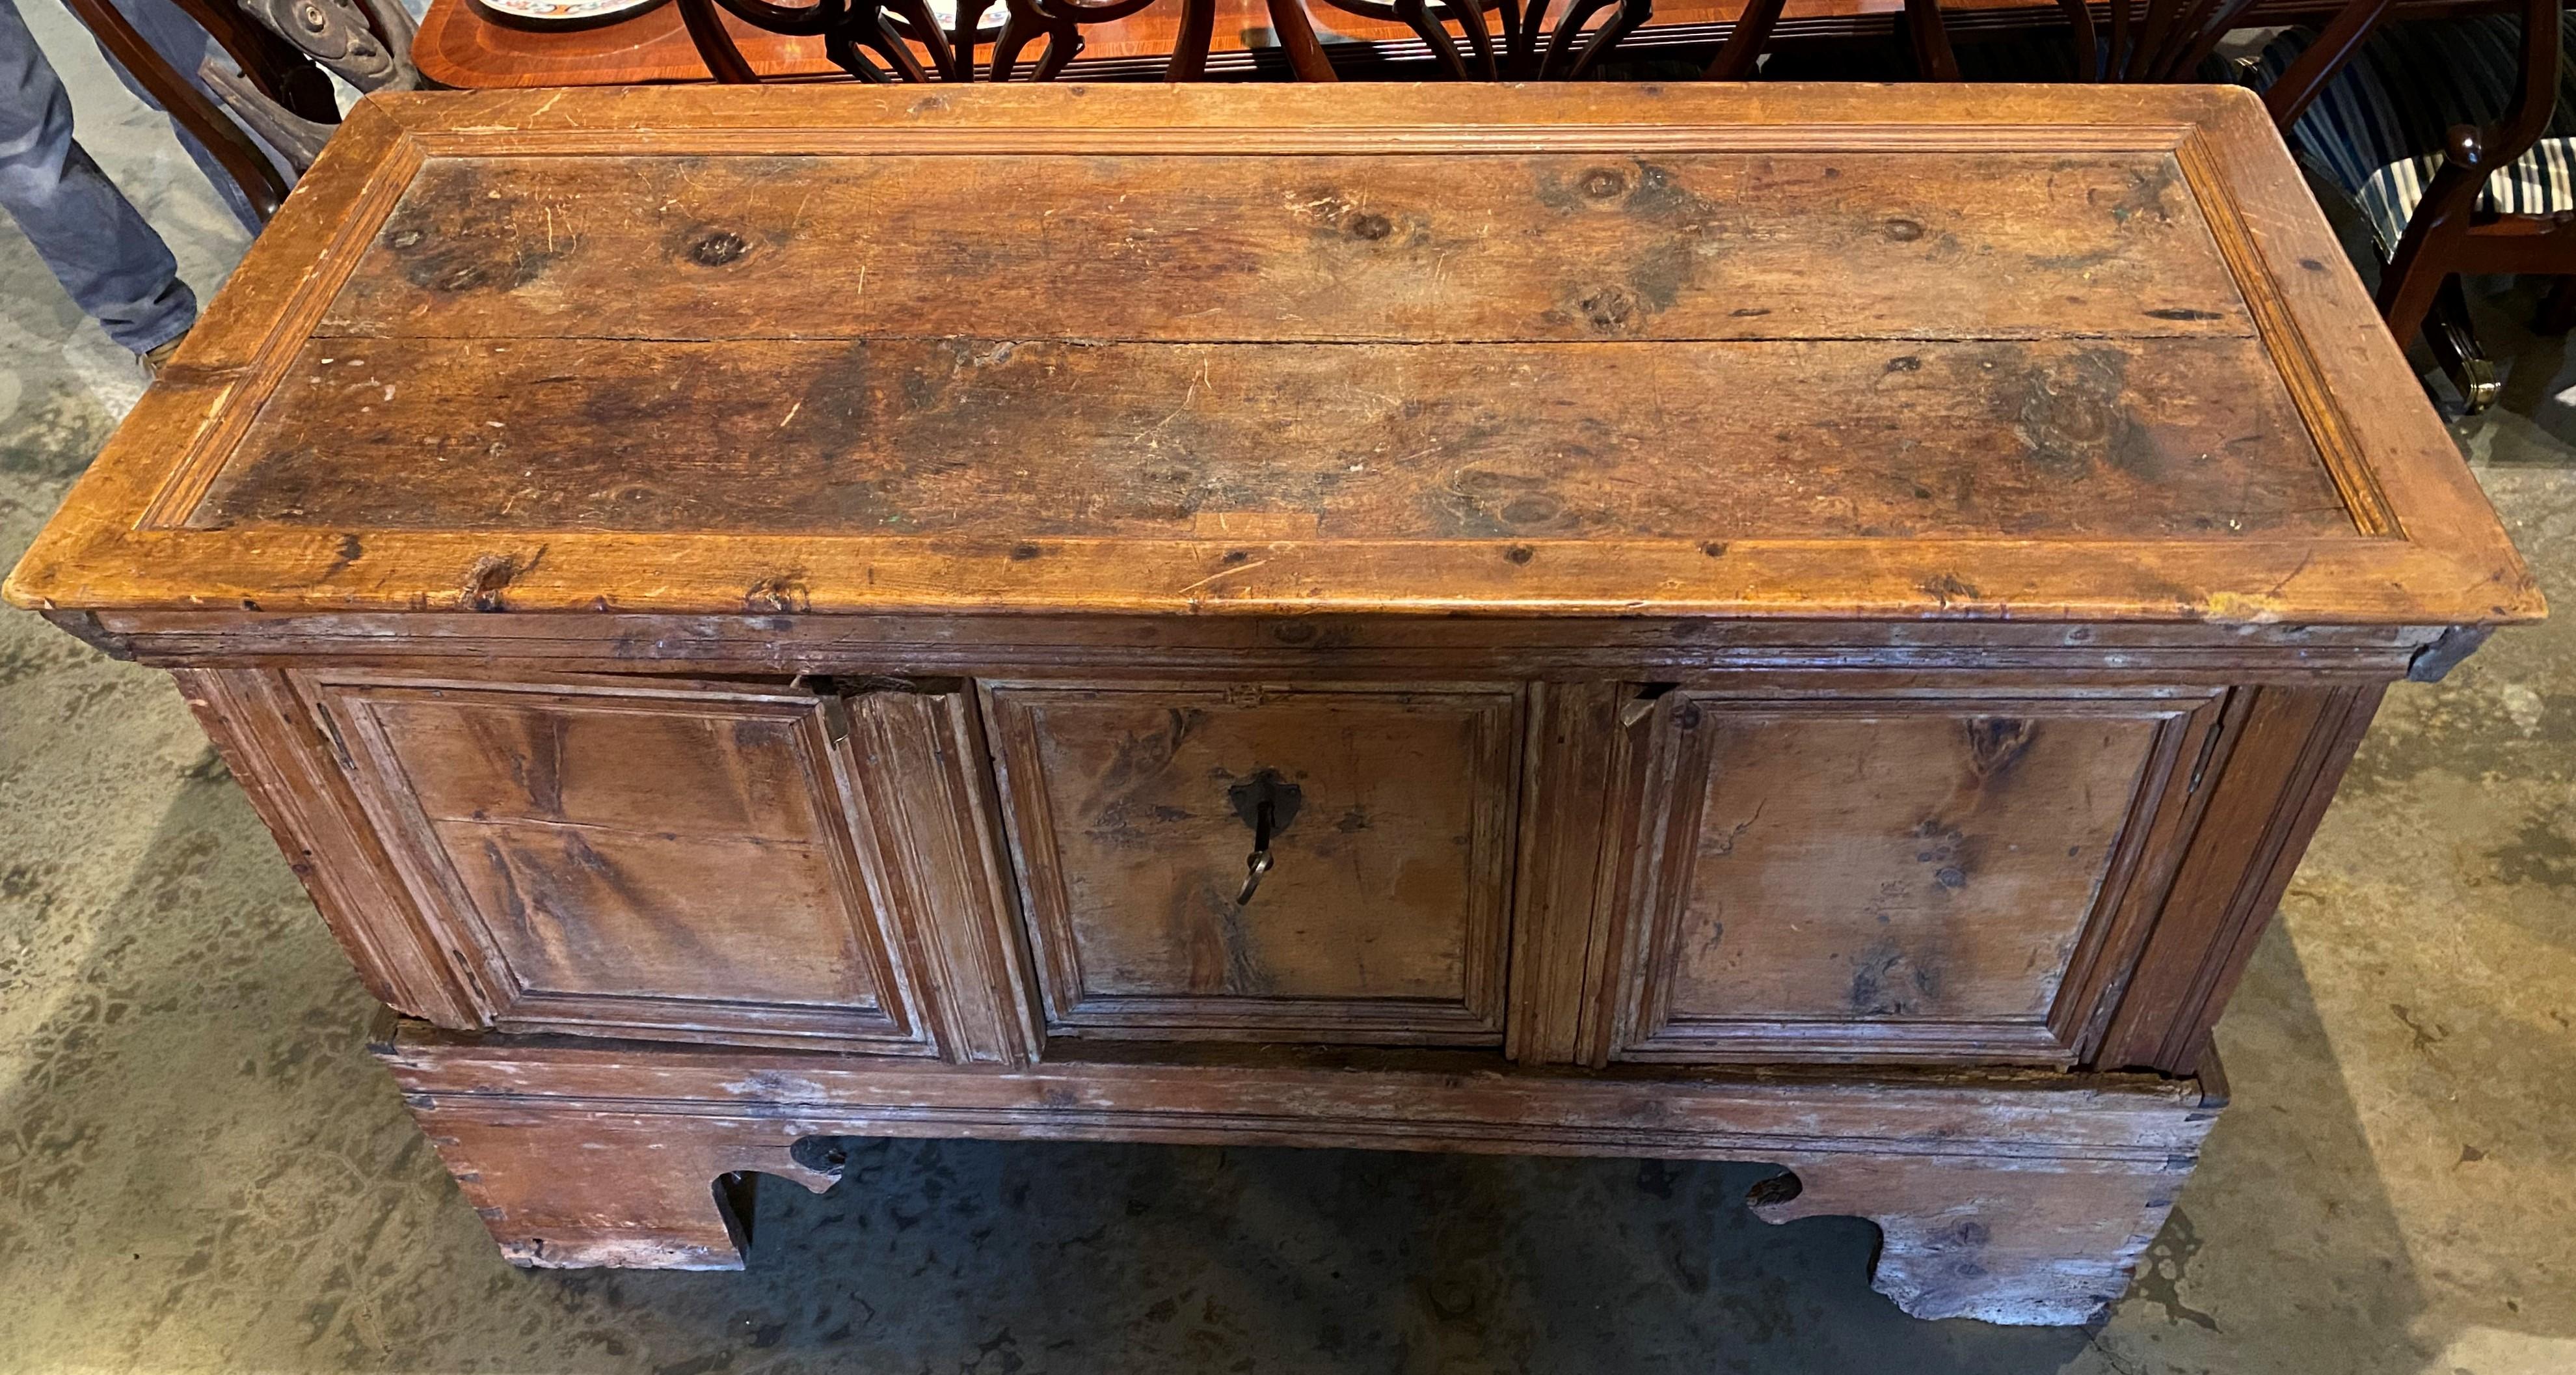 An interesting pine storage chest on frame, with molded panel top and front with old refinish, that has been retro-fitted to open through two of the front panels rather than with the lift top, which is now secured. The center panel contains an